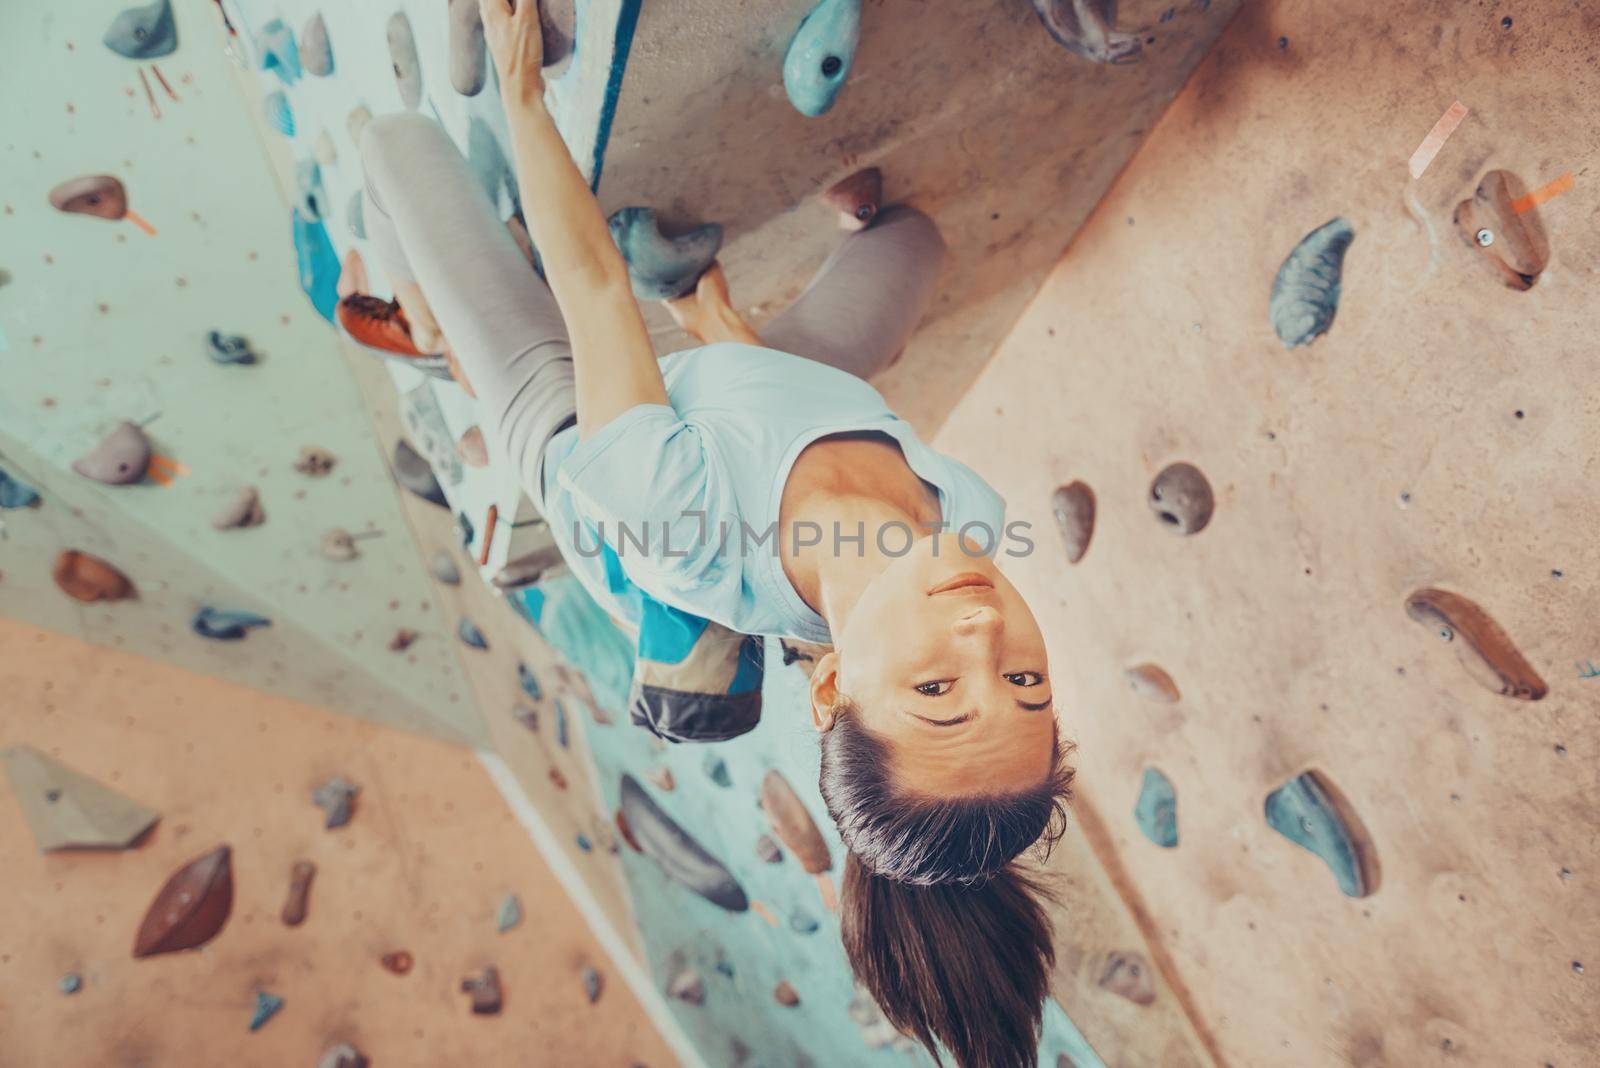 Smiling young woman climbing on practical wall indoor, bouldering, climber looking at camera